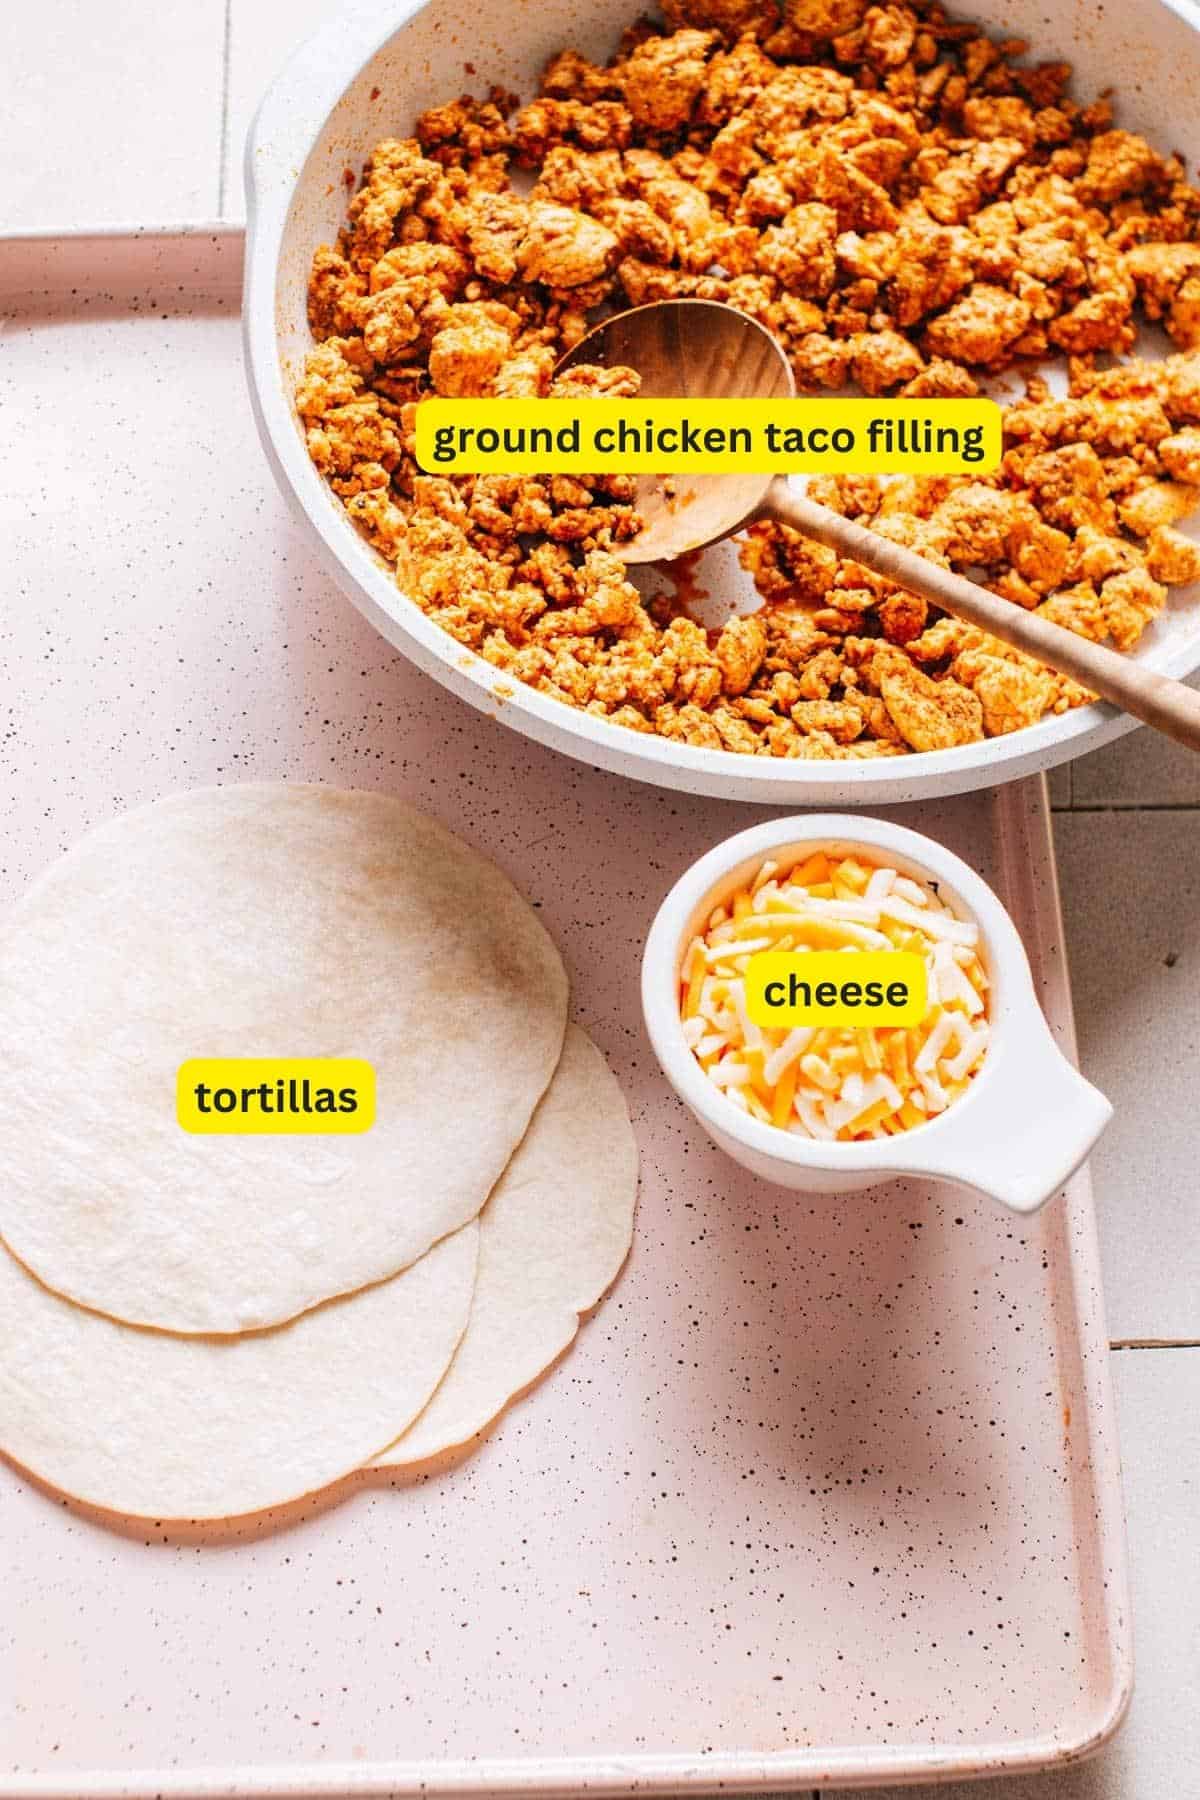 Ingredients for crispy baked chicken tacos, includes ground chicken taco filling, tortillas and cheese.